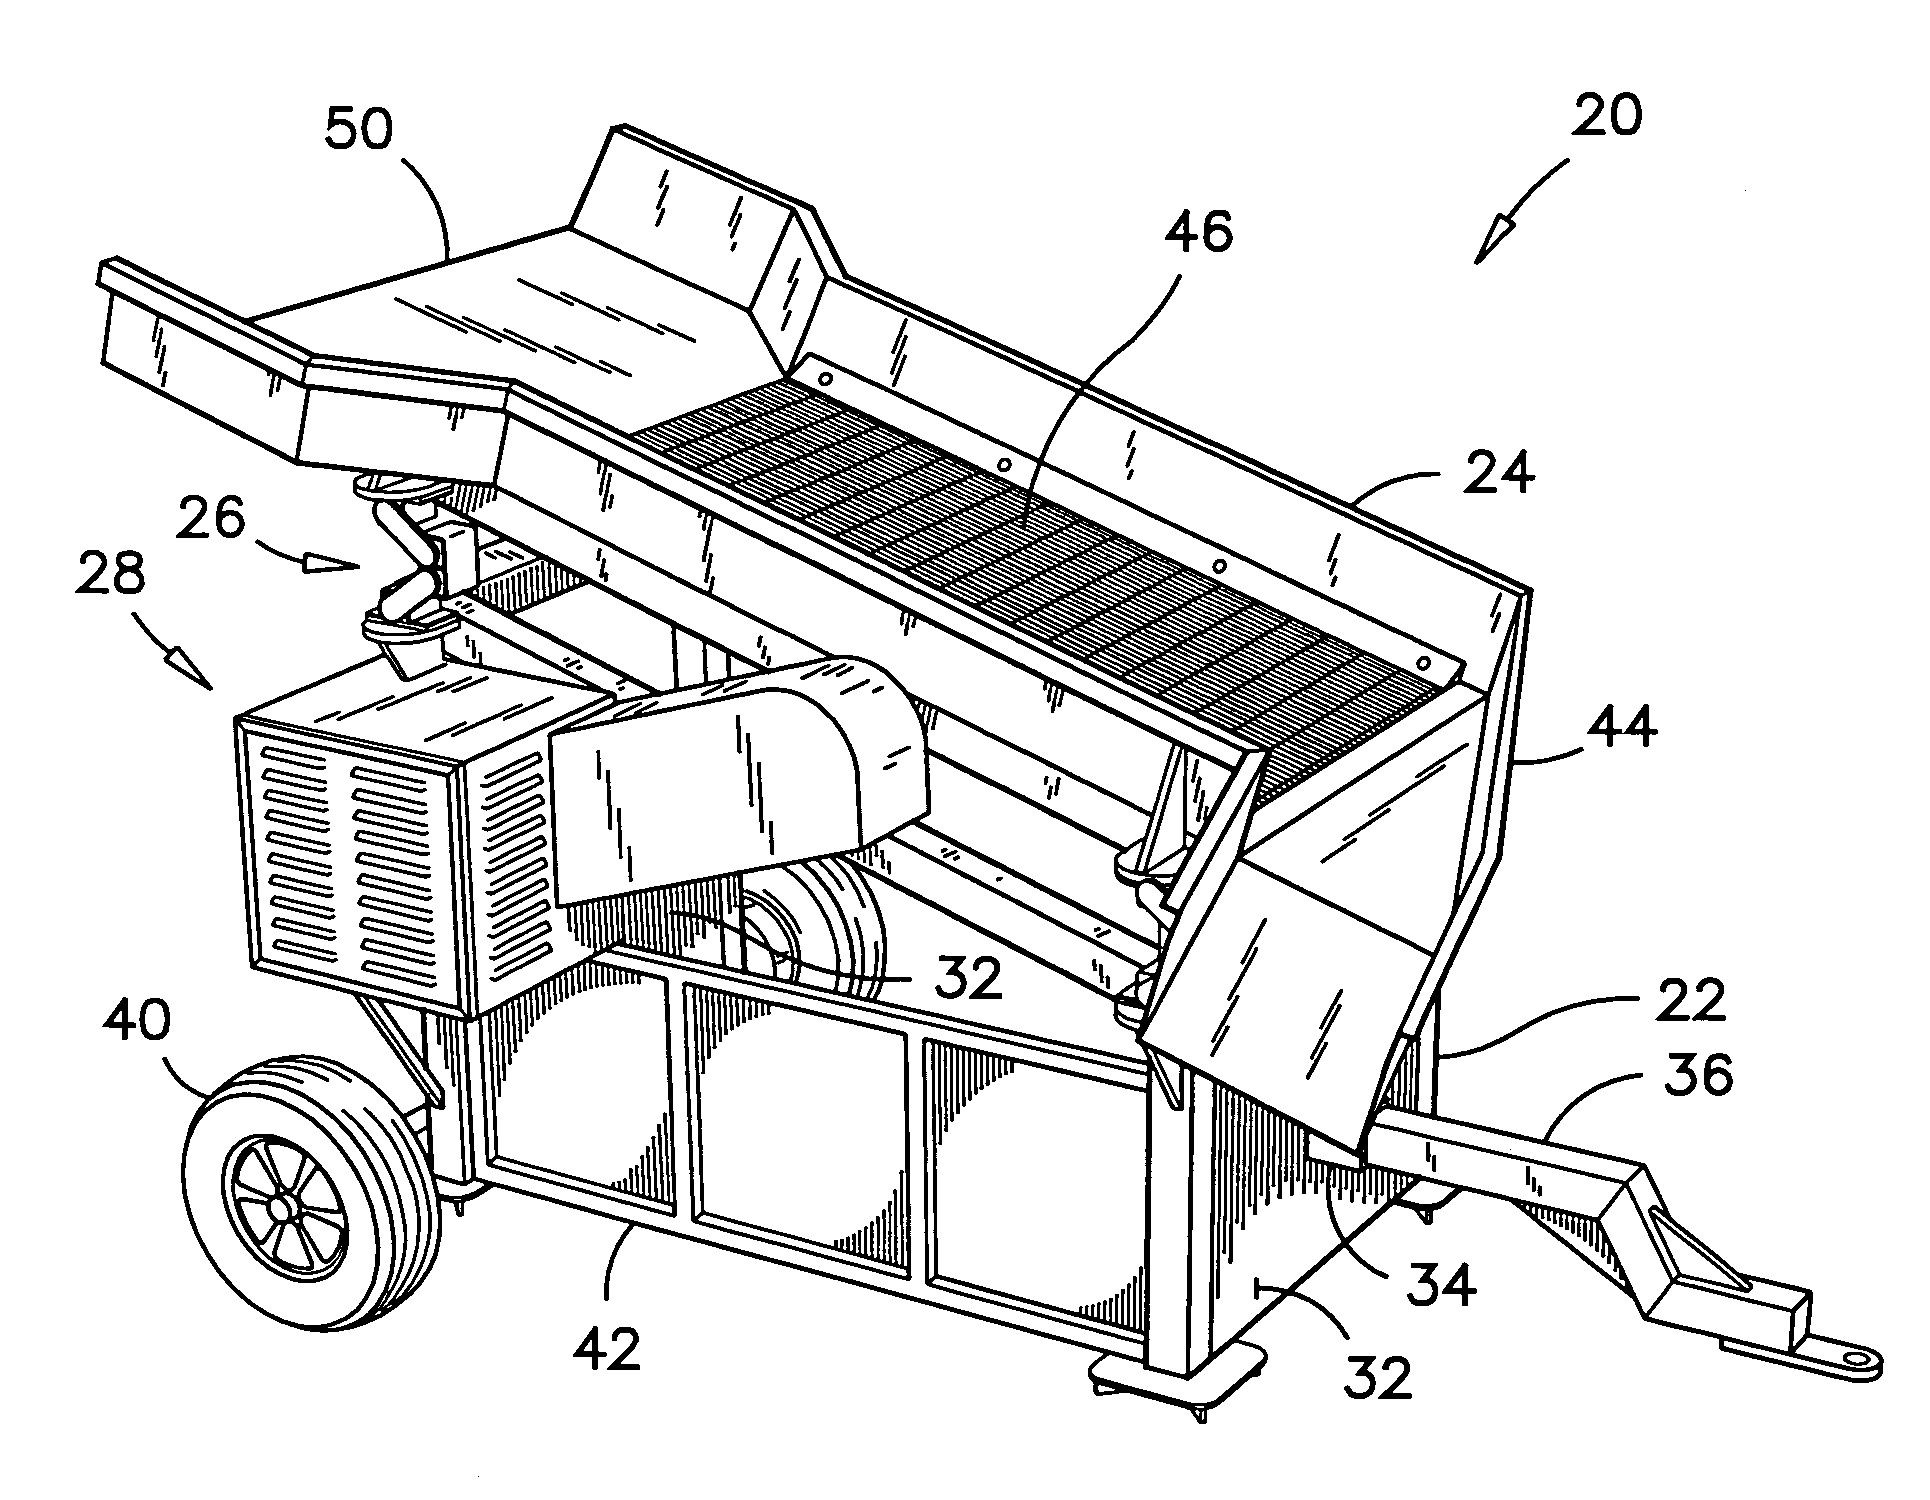 Vibrating screen with a loading pan